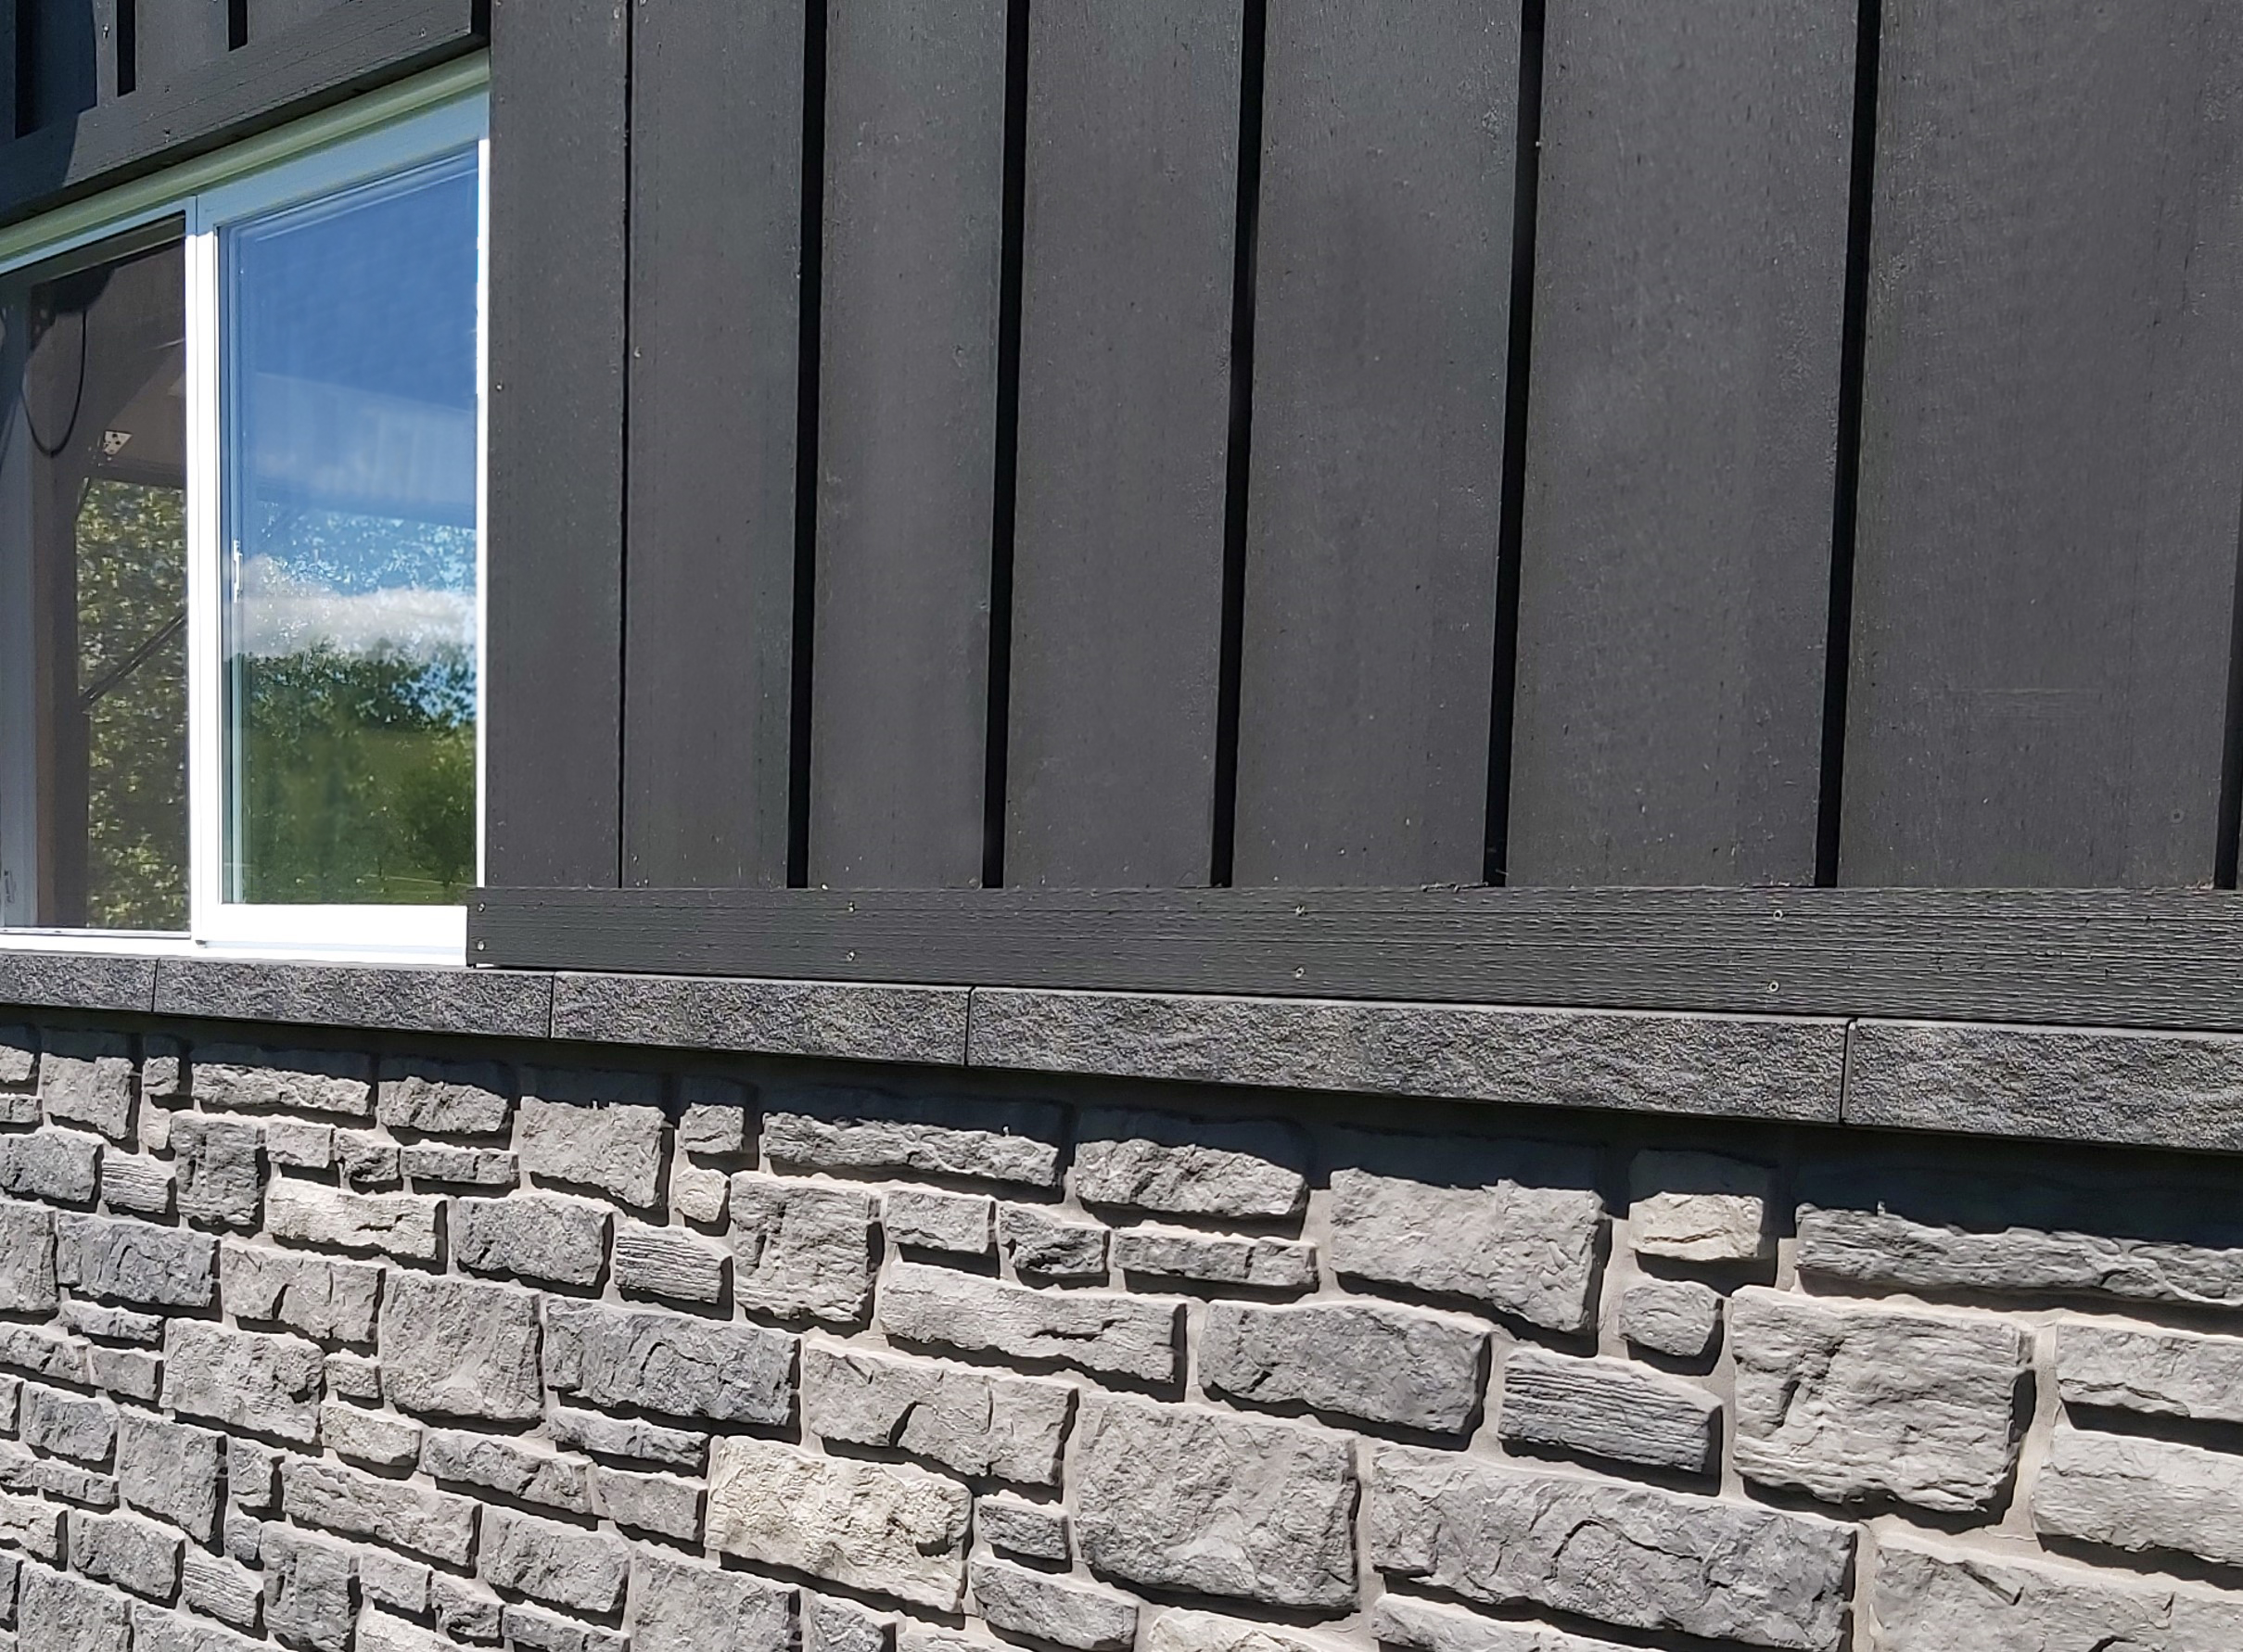 Lightweight and easy to cut, Architectural Sill is designed with moisture management in mind, with a forward slope to guide water away from the structure.